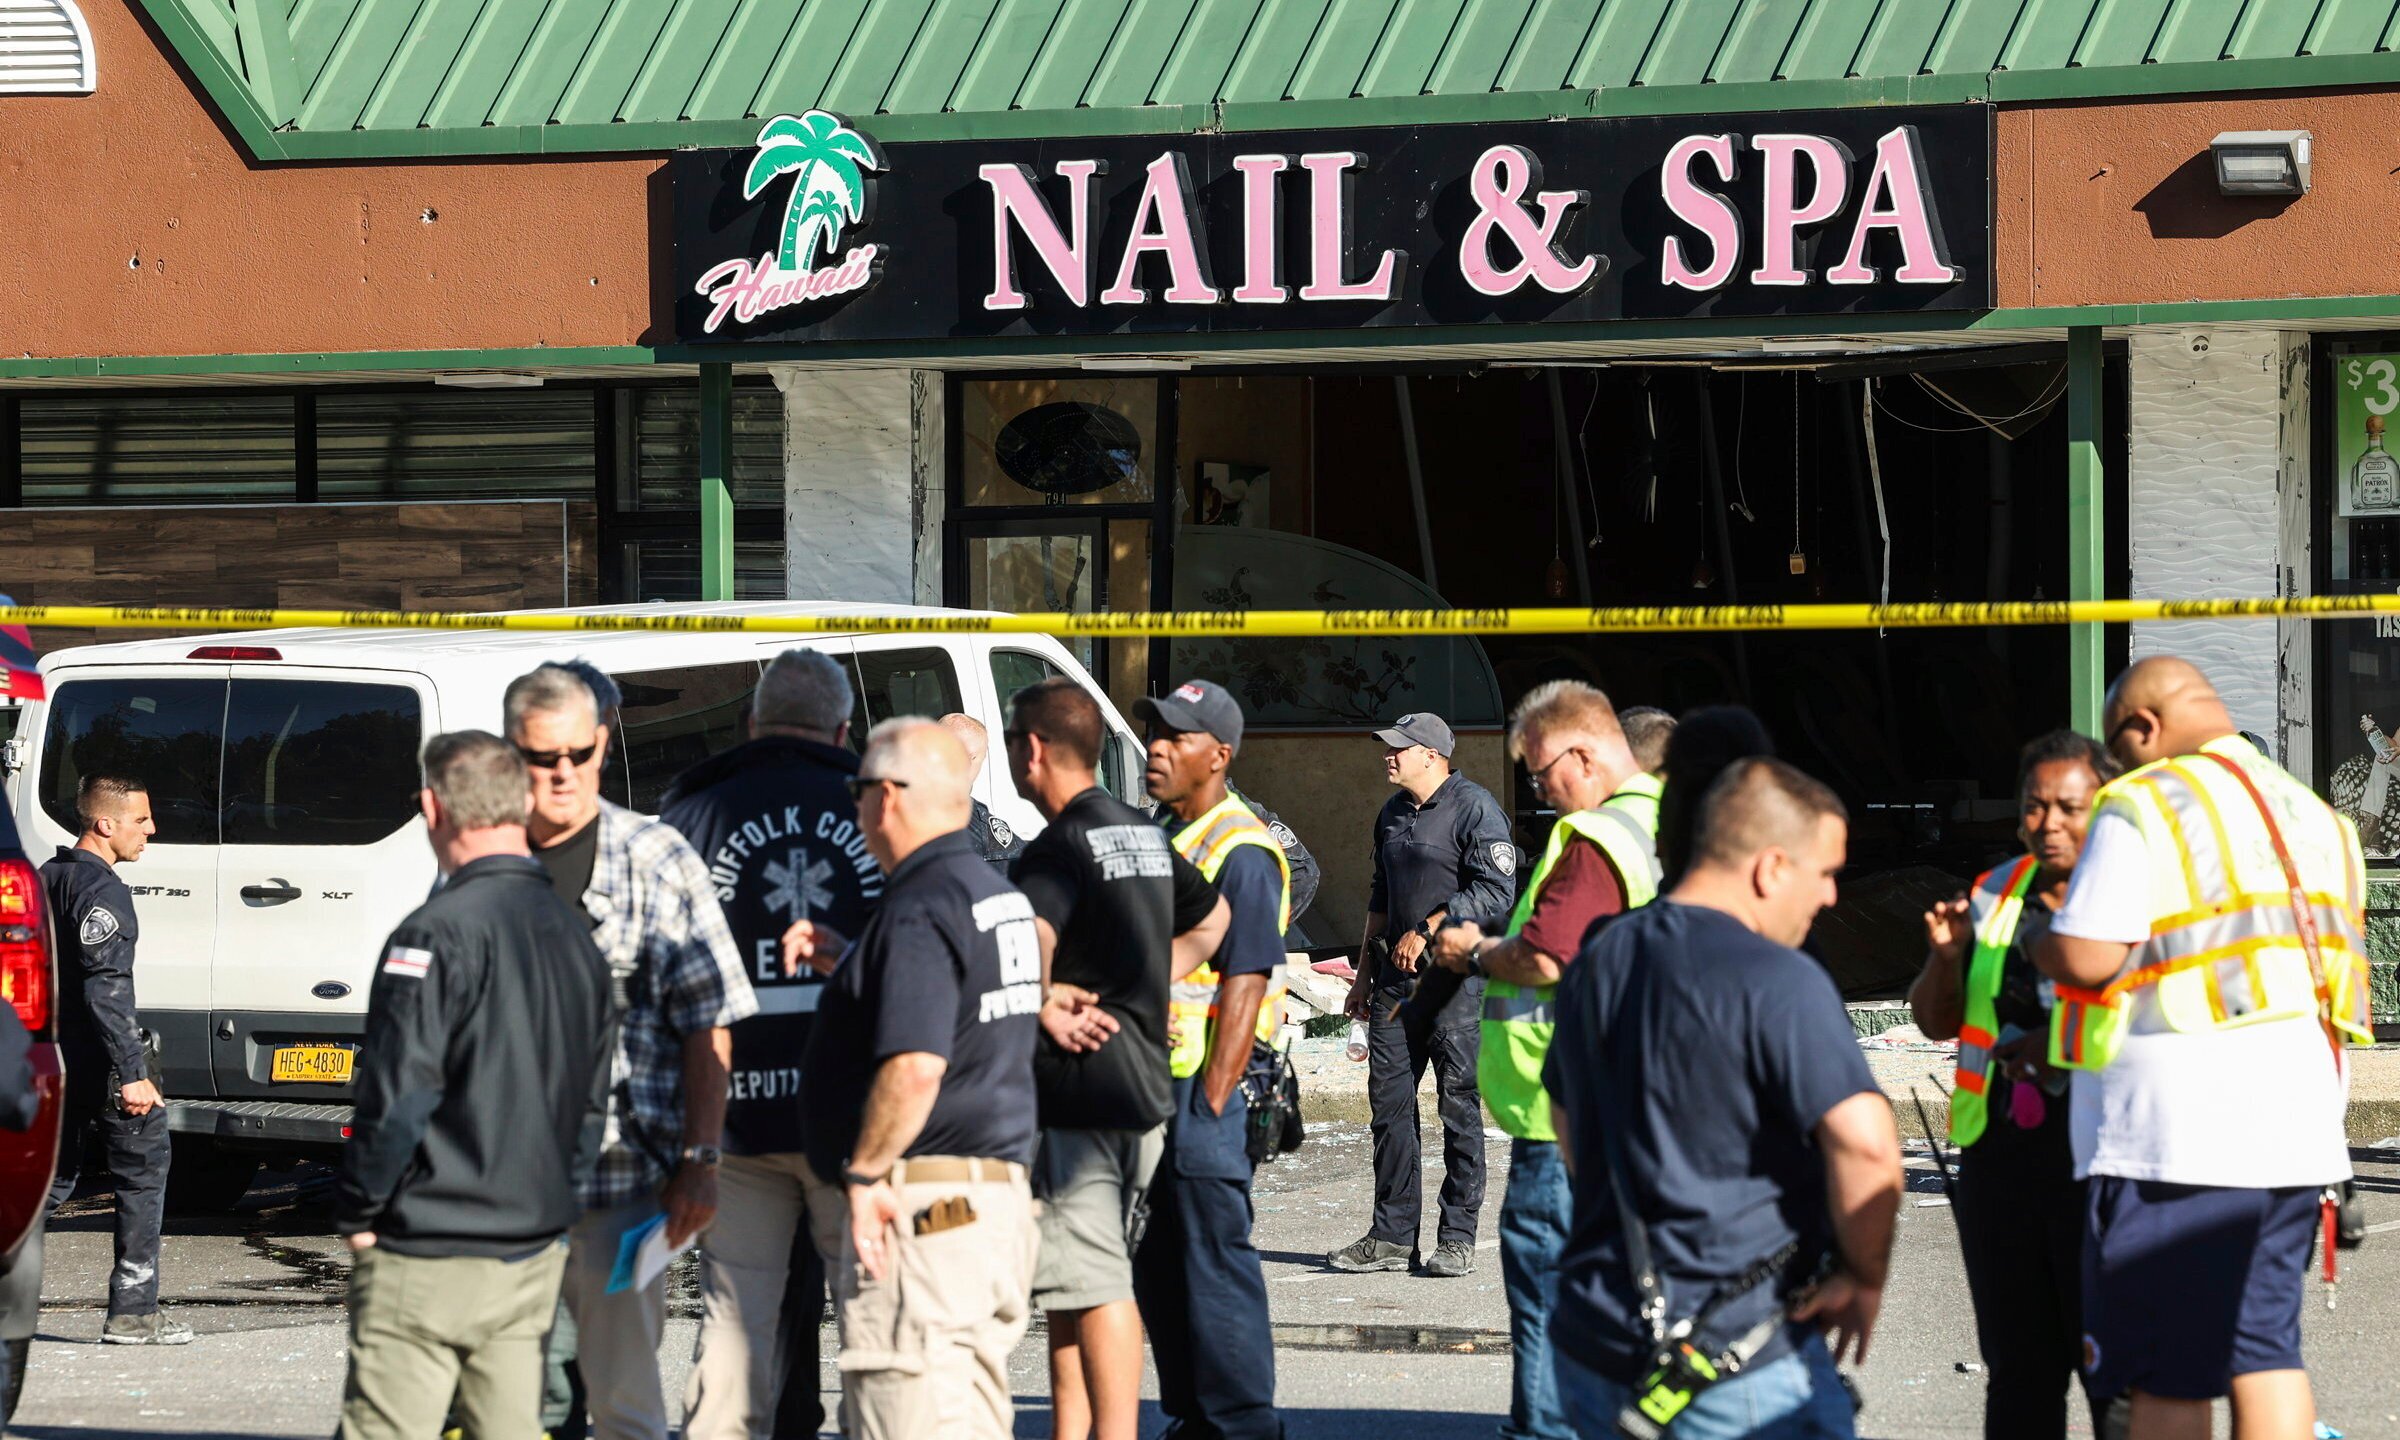 Emergency personnel respond to a scene after a vehicle drove into Hawaii Nail & Spa, killing and injuring multiple people Friday, June 28, 2024, in Deer Park, N.Y. (Steve Pfost/Newsday via AP)